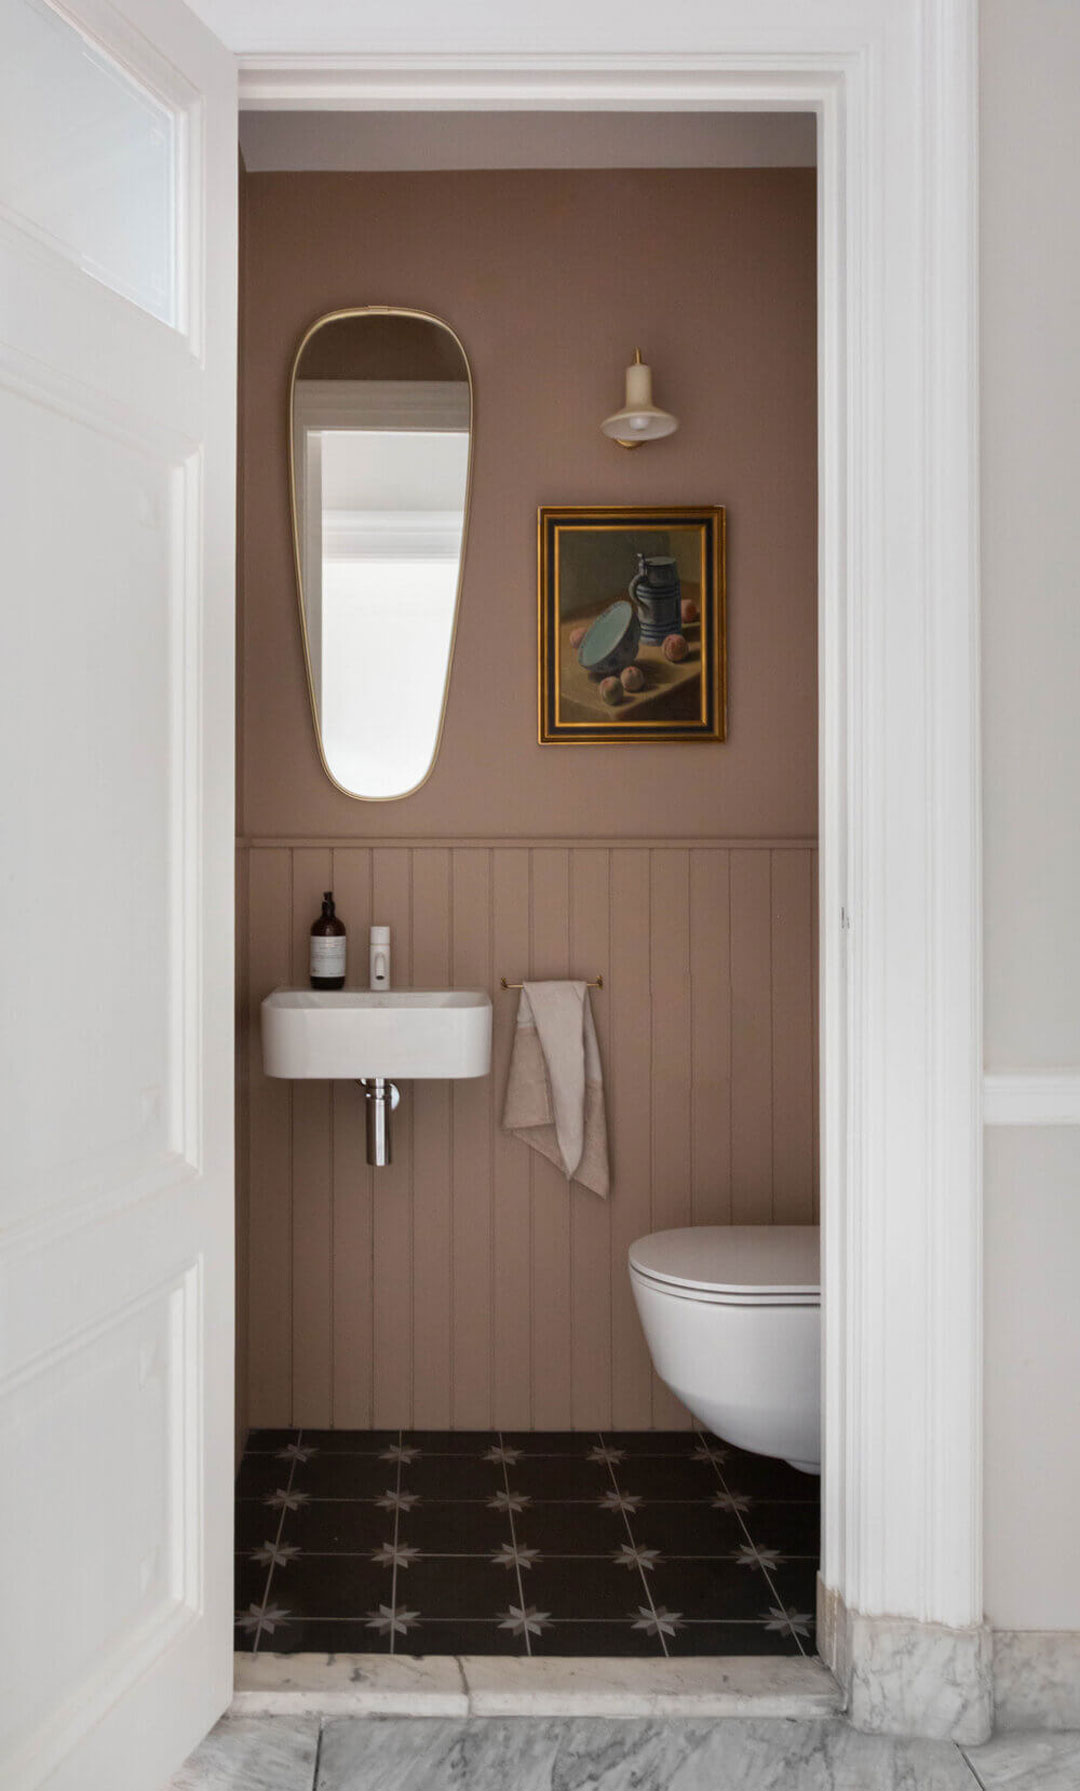 Small cloakroom ideas to let natural light in to your downstairs hidden toilet